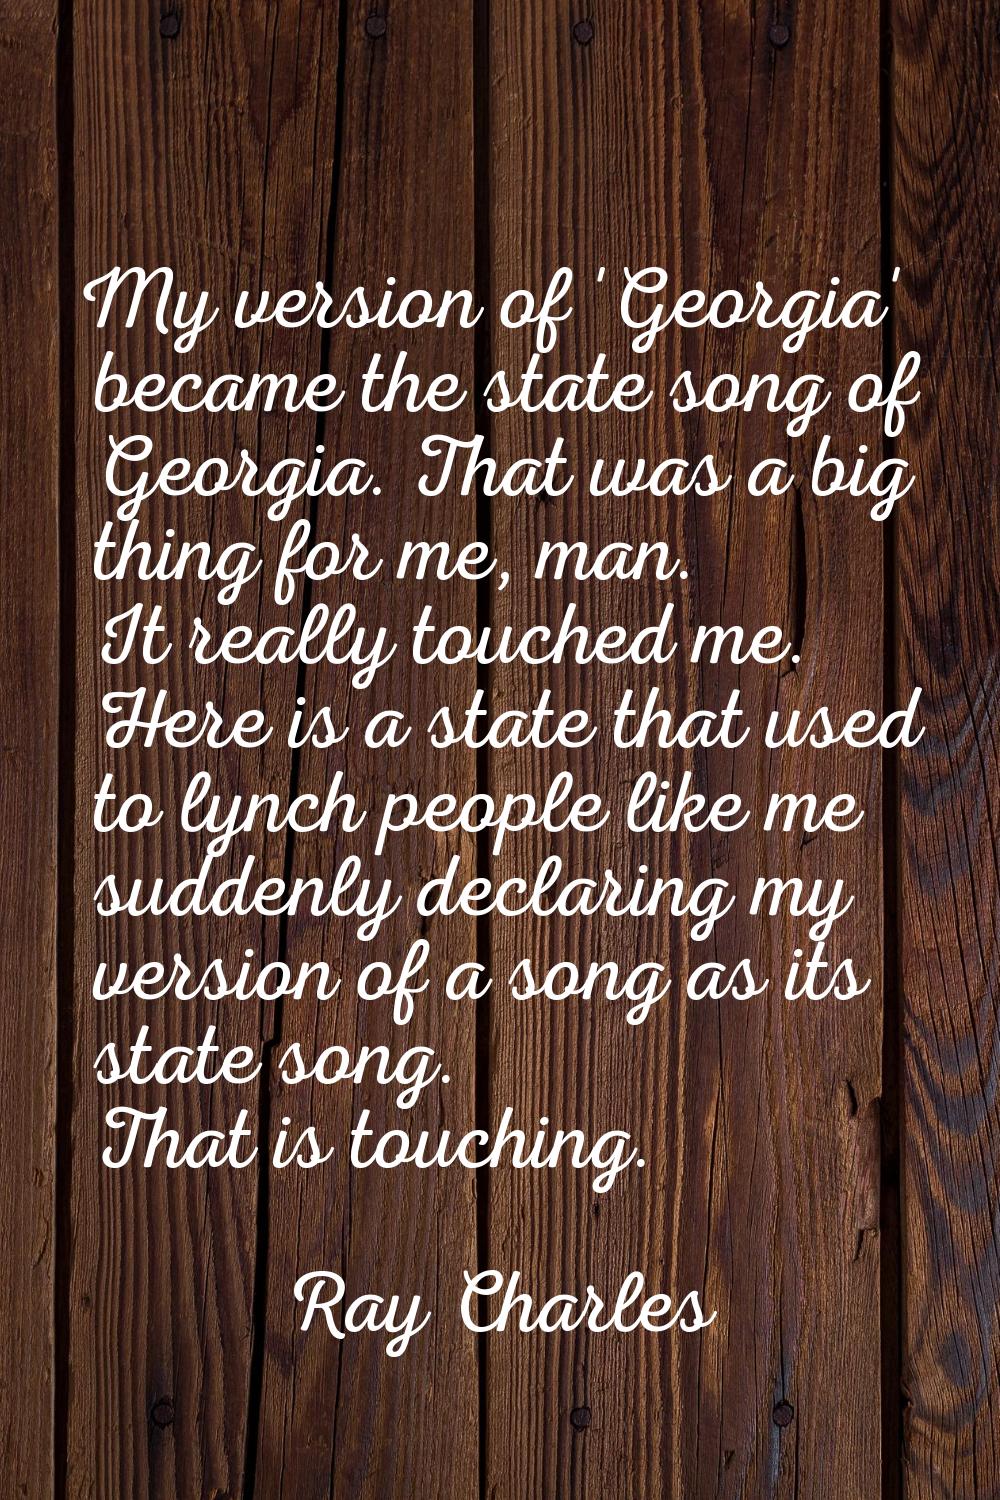 My version of 'Georgia' became the state song of Georgia. That was a big thing for me, man. It real